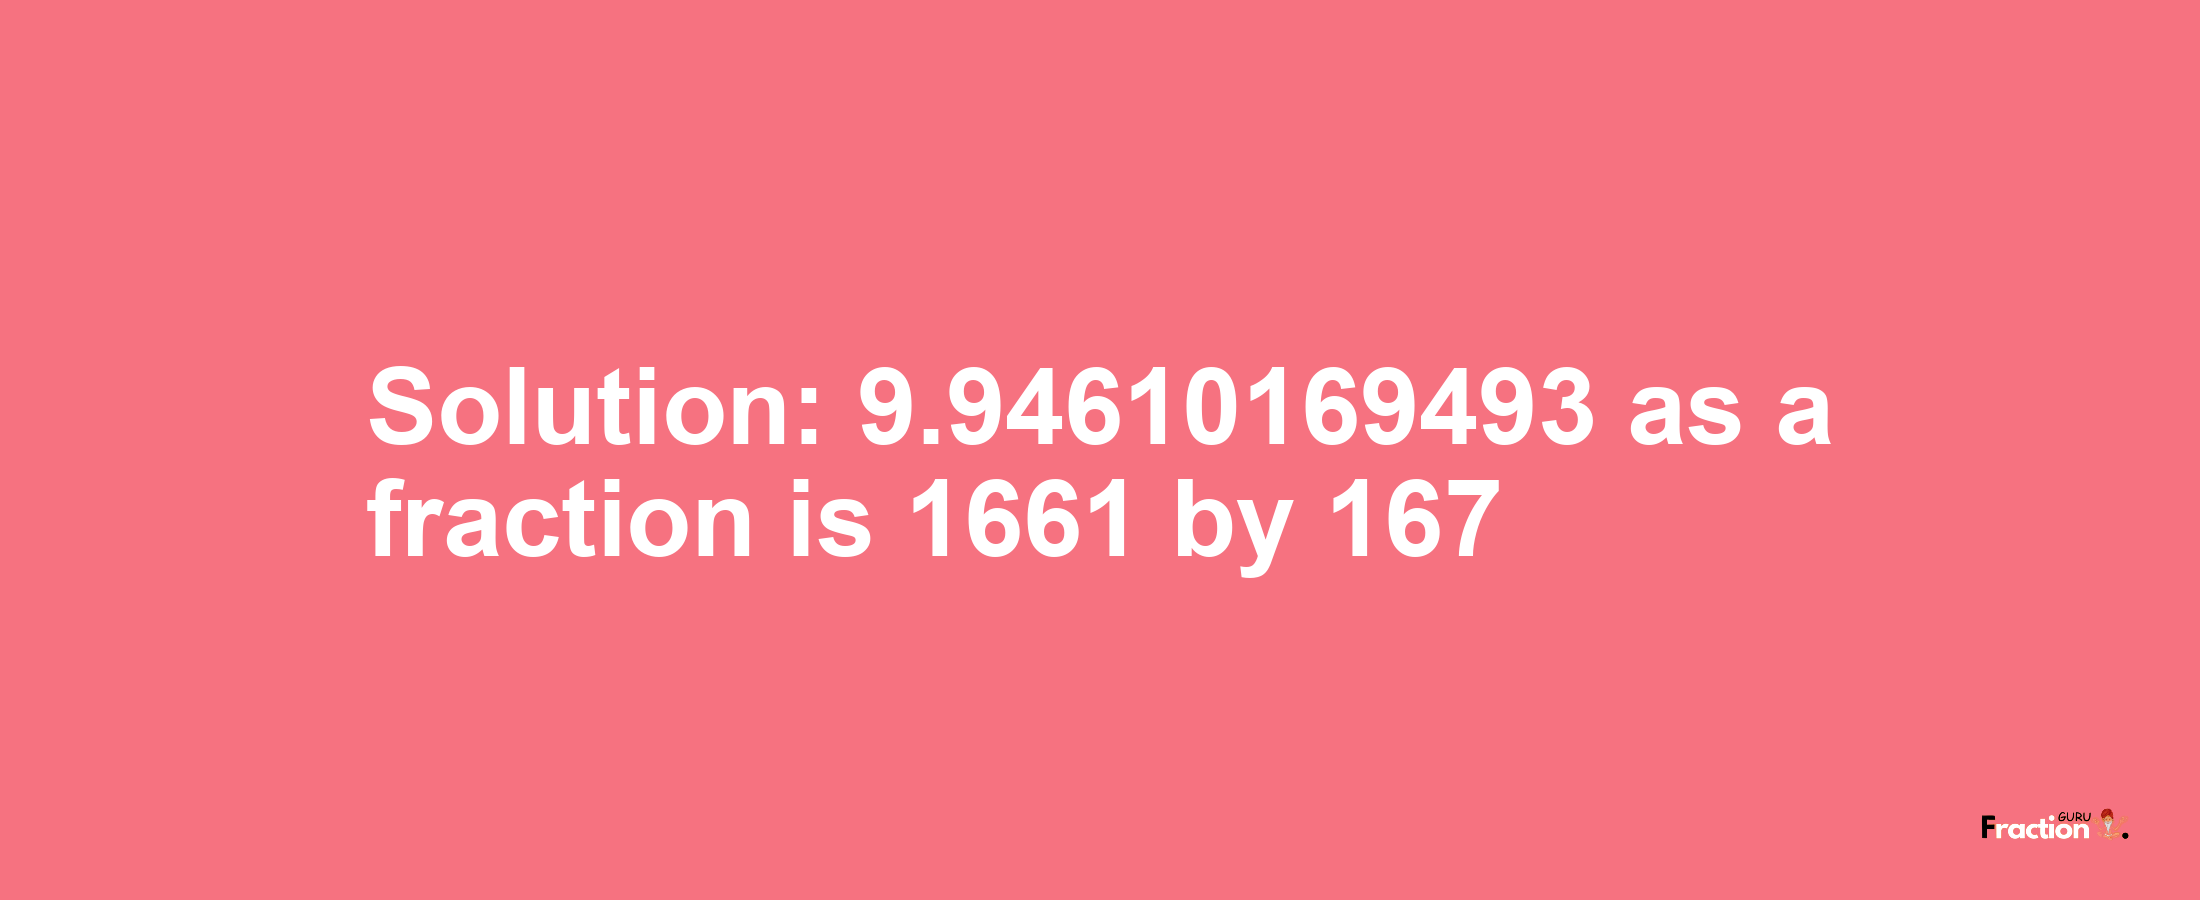 Solution:9.94610169493 as a fraction is 1661/167